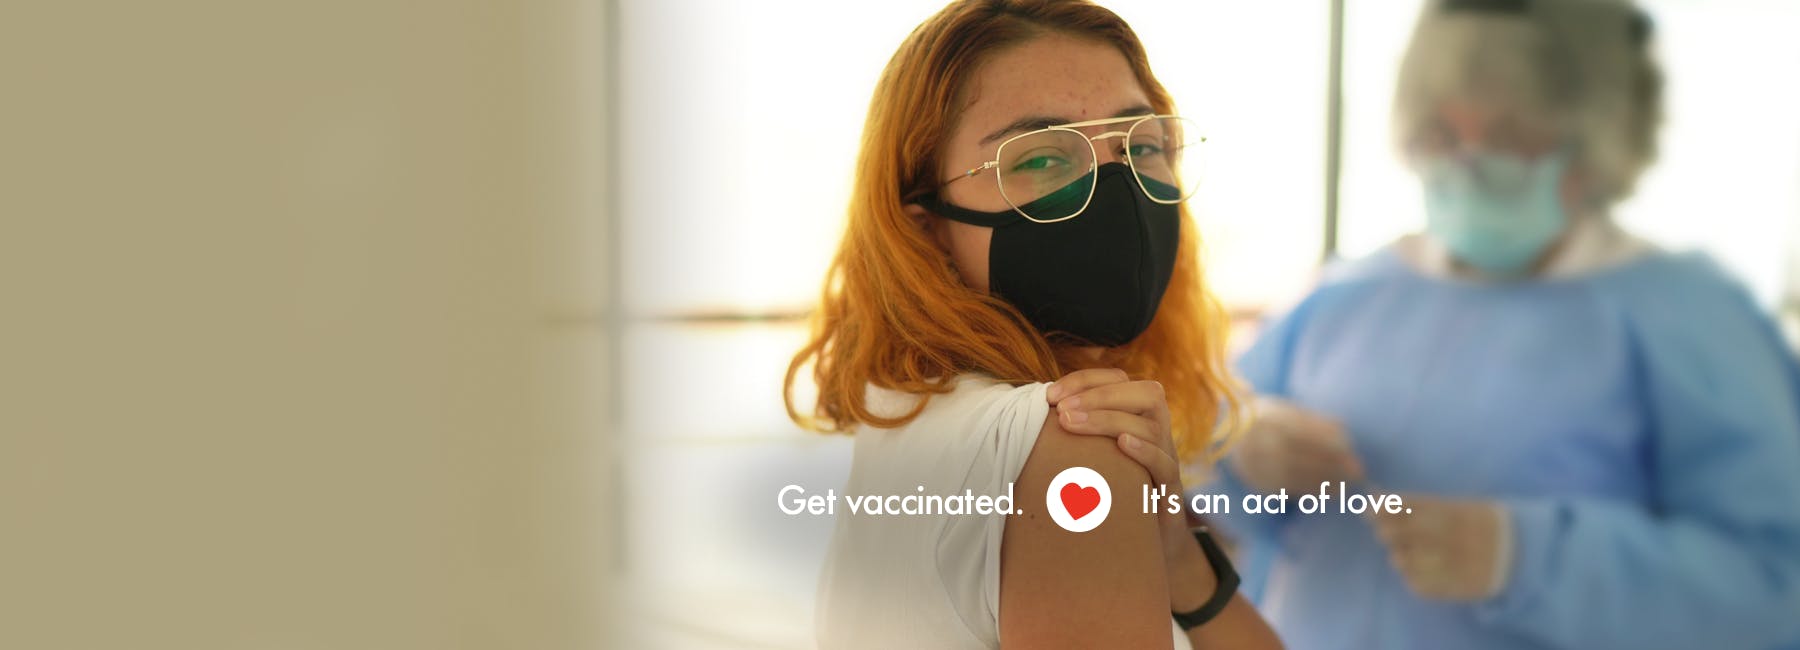 Girl with glasses and a mask showing her arm after getting a vaccine shot